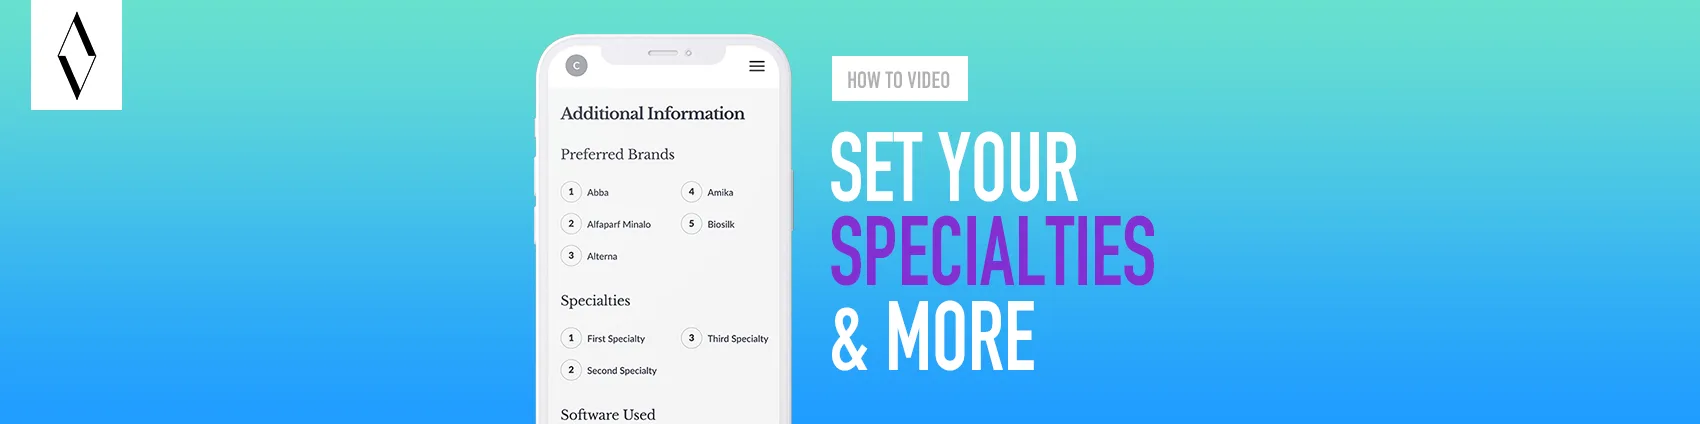 NEW* HOW TO SERIES: Getting Started with ‘Additional Information’ Section